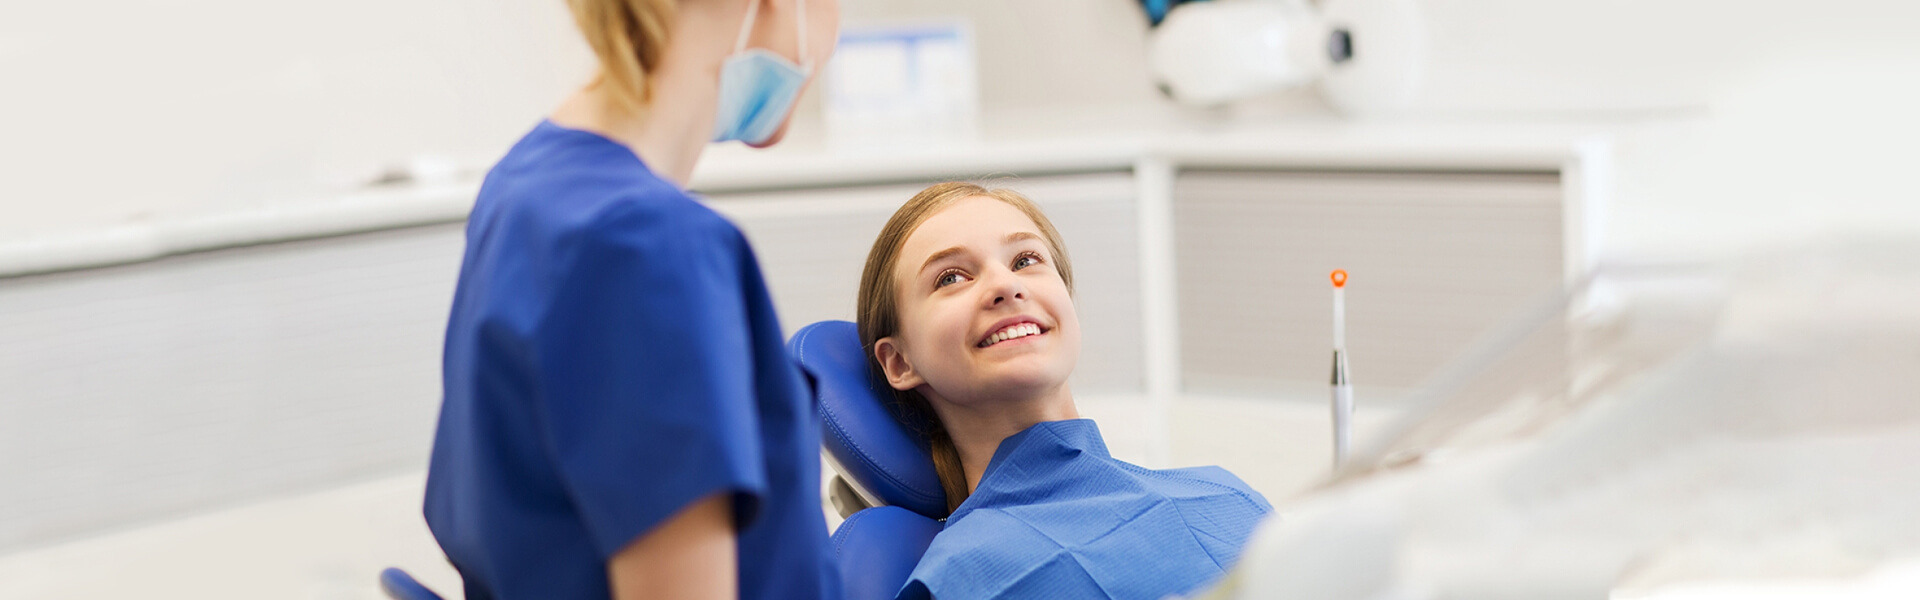 Choosing the Right Paediatric Dentist for Your Child